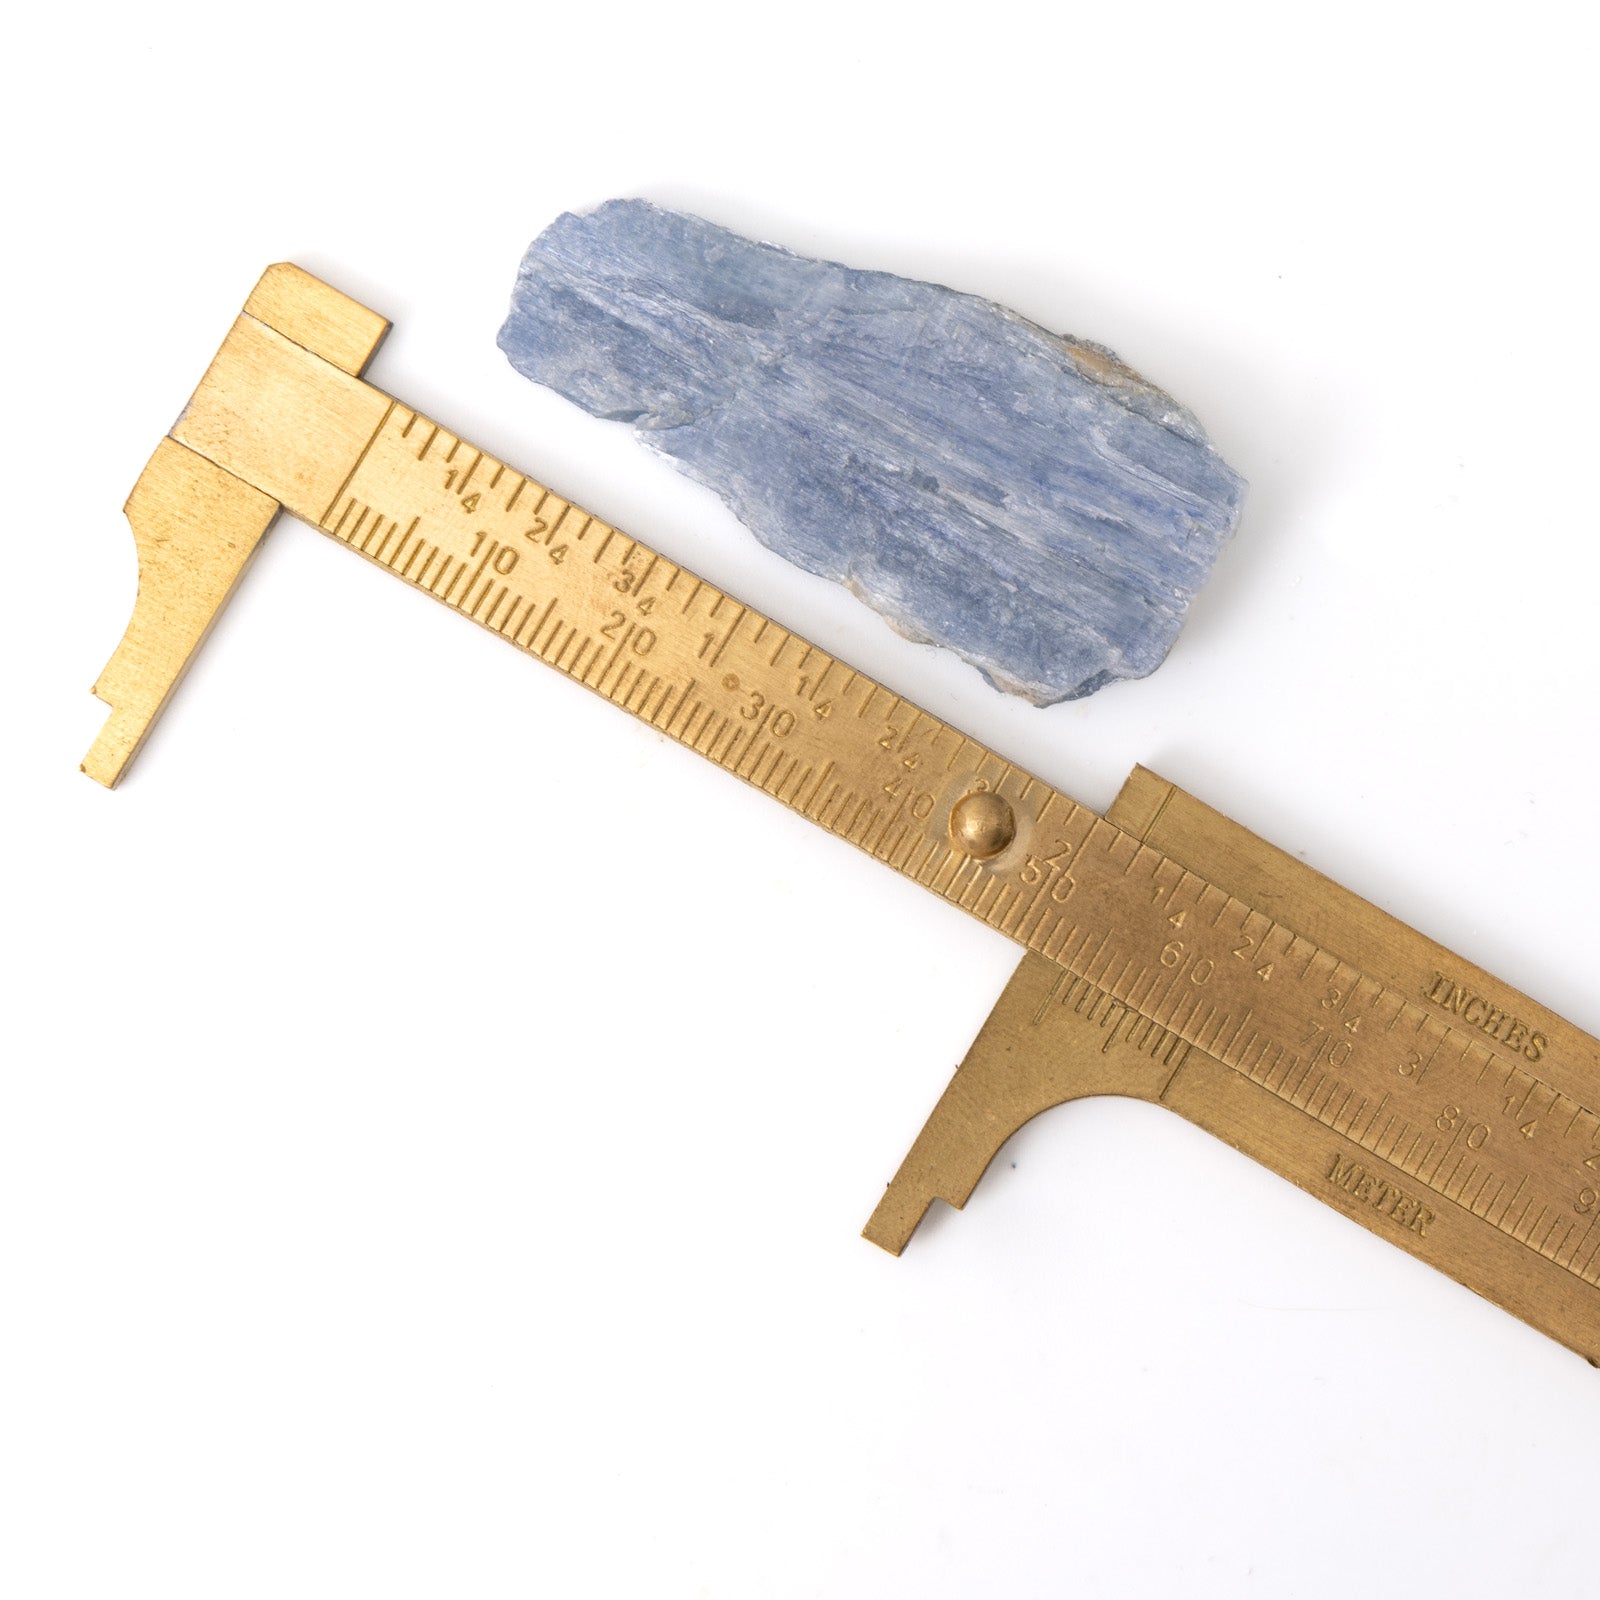 Blue Kyanite blades, approximately 1.5" to 2" in size, handpicked for you by Juniper Stones.